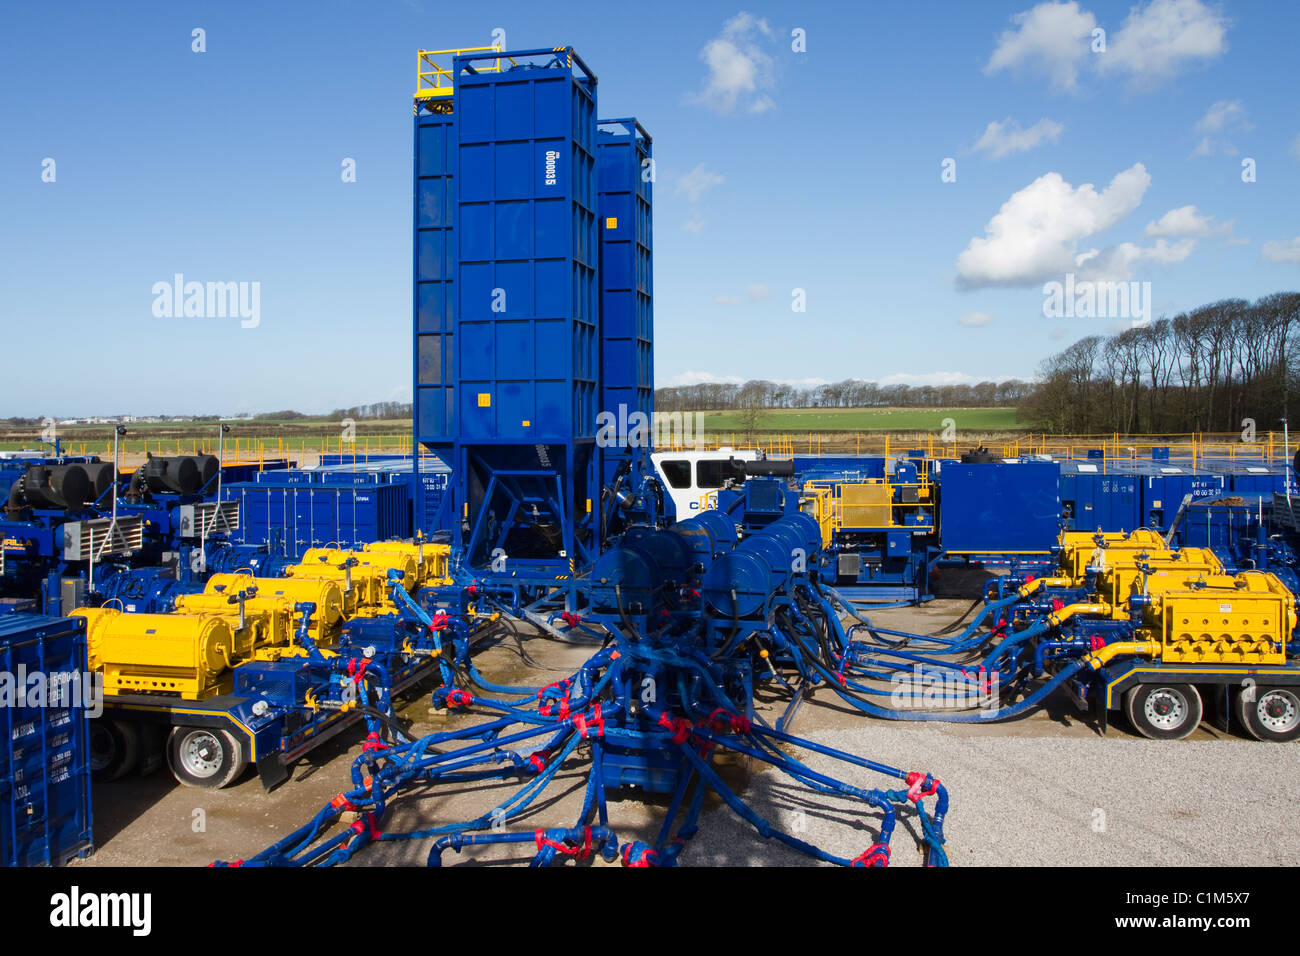 Fracking Pumps & Sand Silos at Cuadrilla Resources Frac pump exploration & drilling equipment at Shale Gas Drill Site, Presse Hall Farm, Blackpool, UK Stock Photo